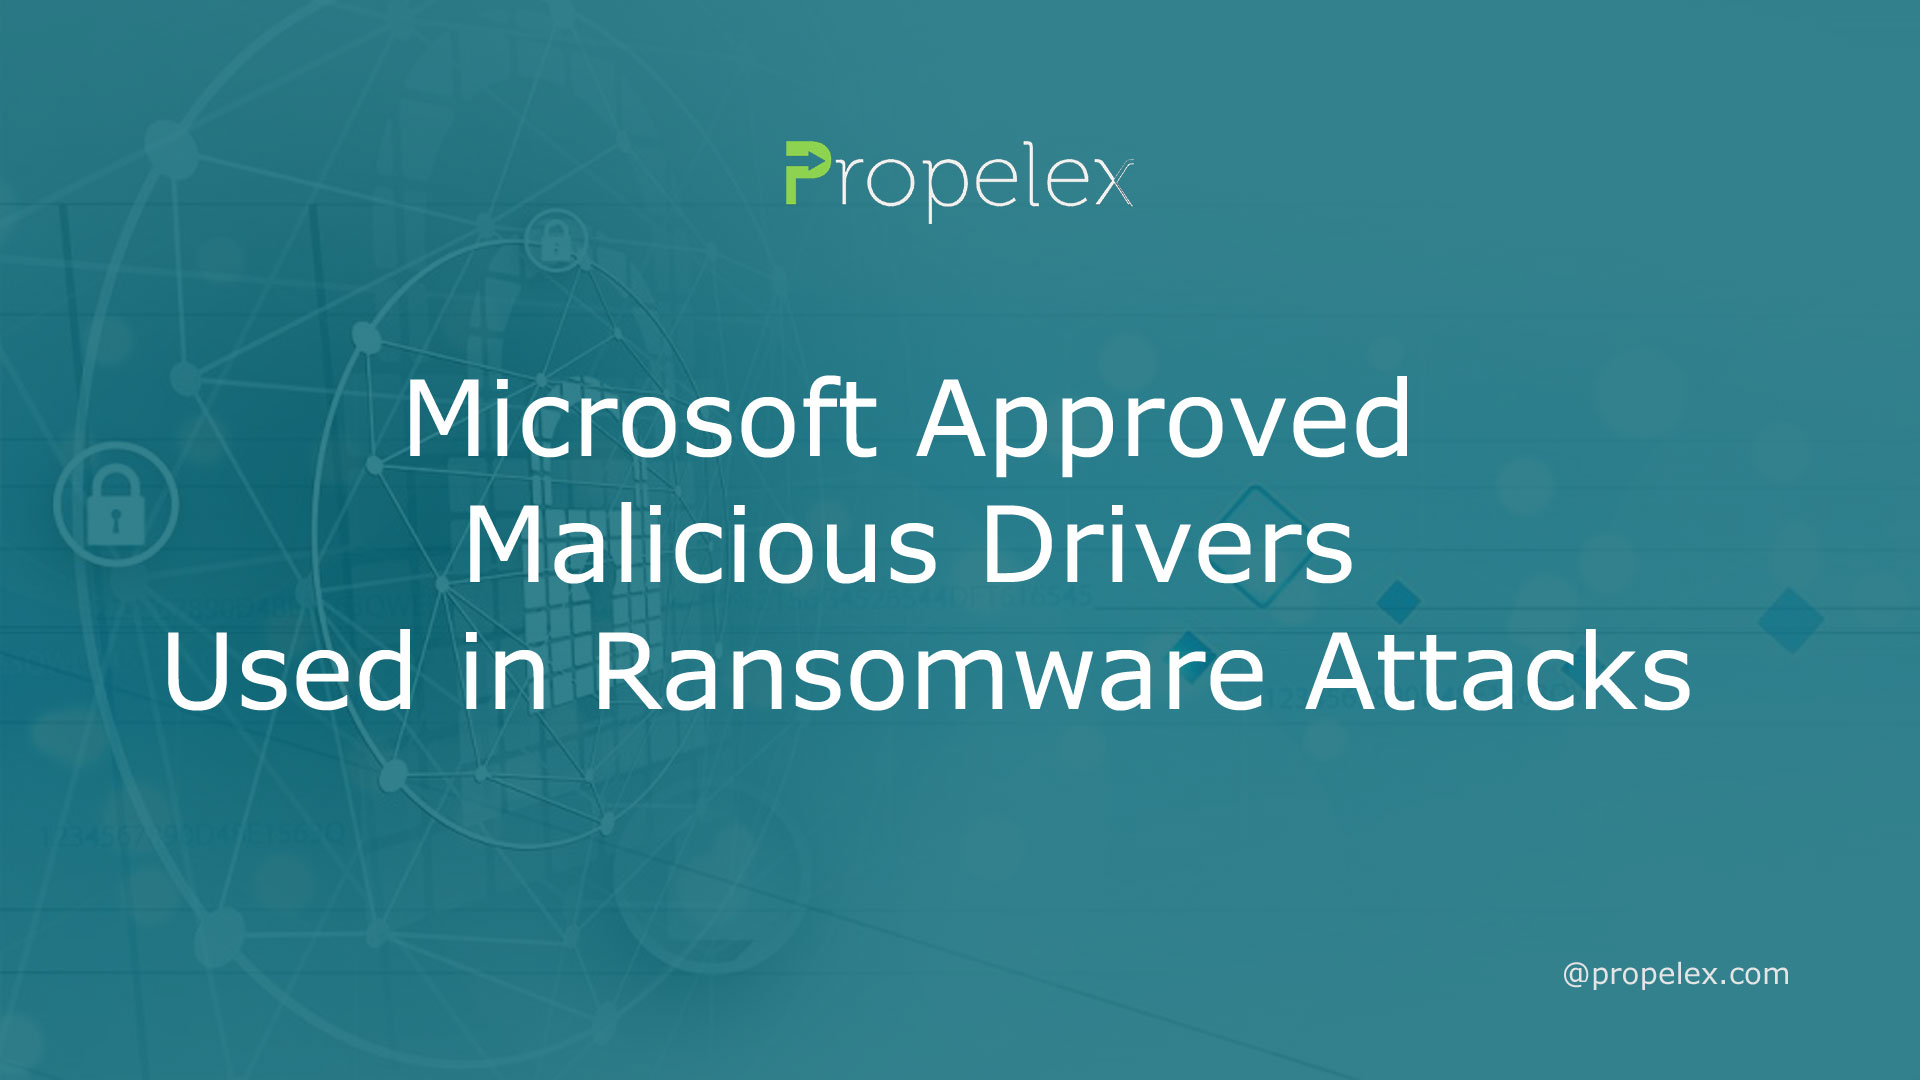 Microsoft Approved Malicious Drivers Used in Ransomware Attacks